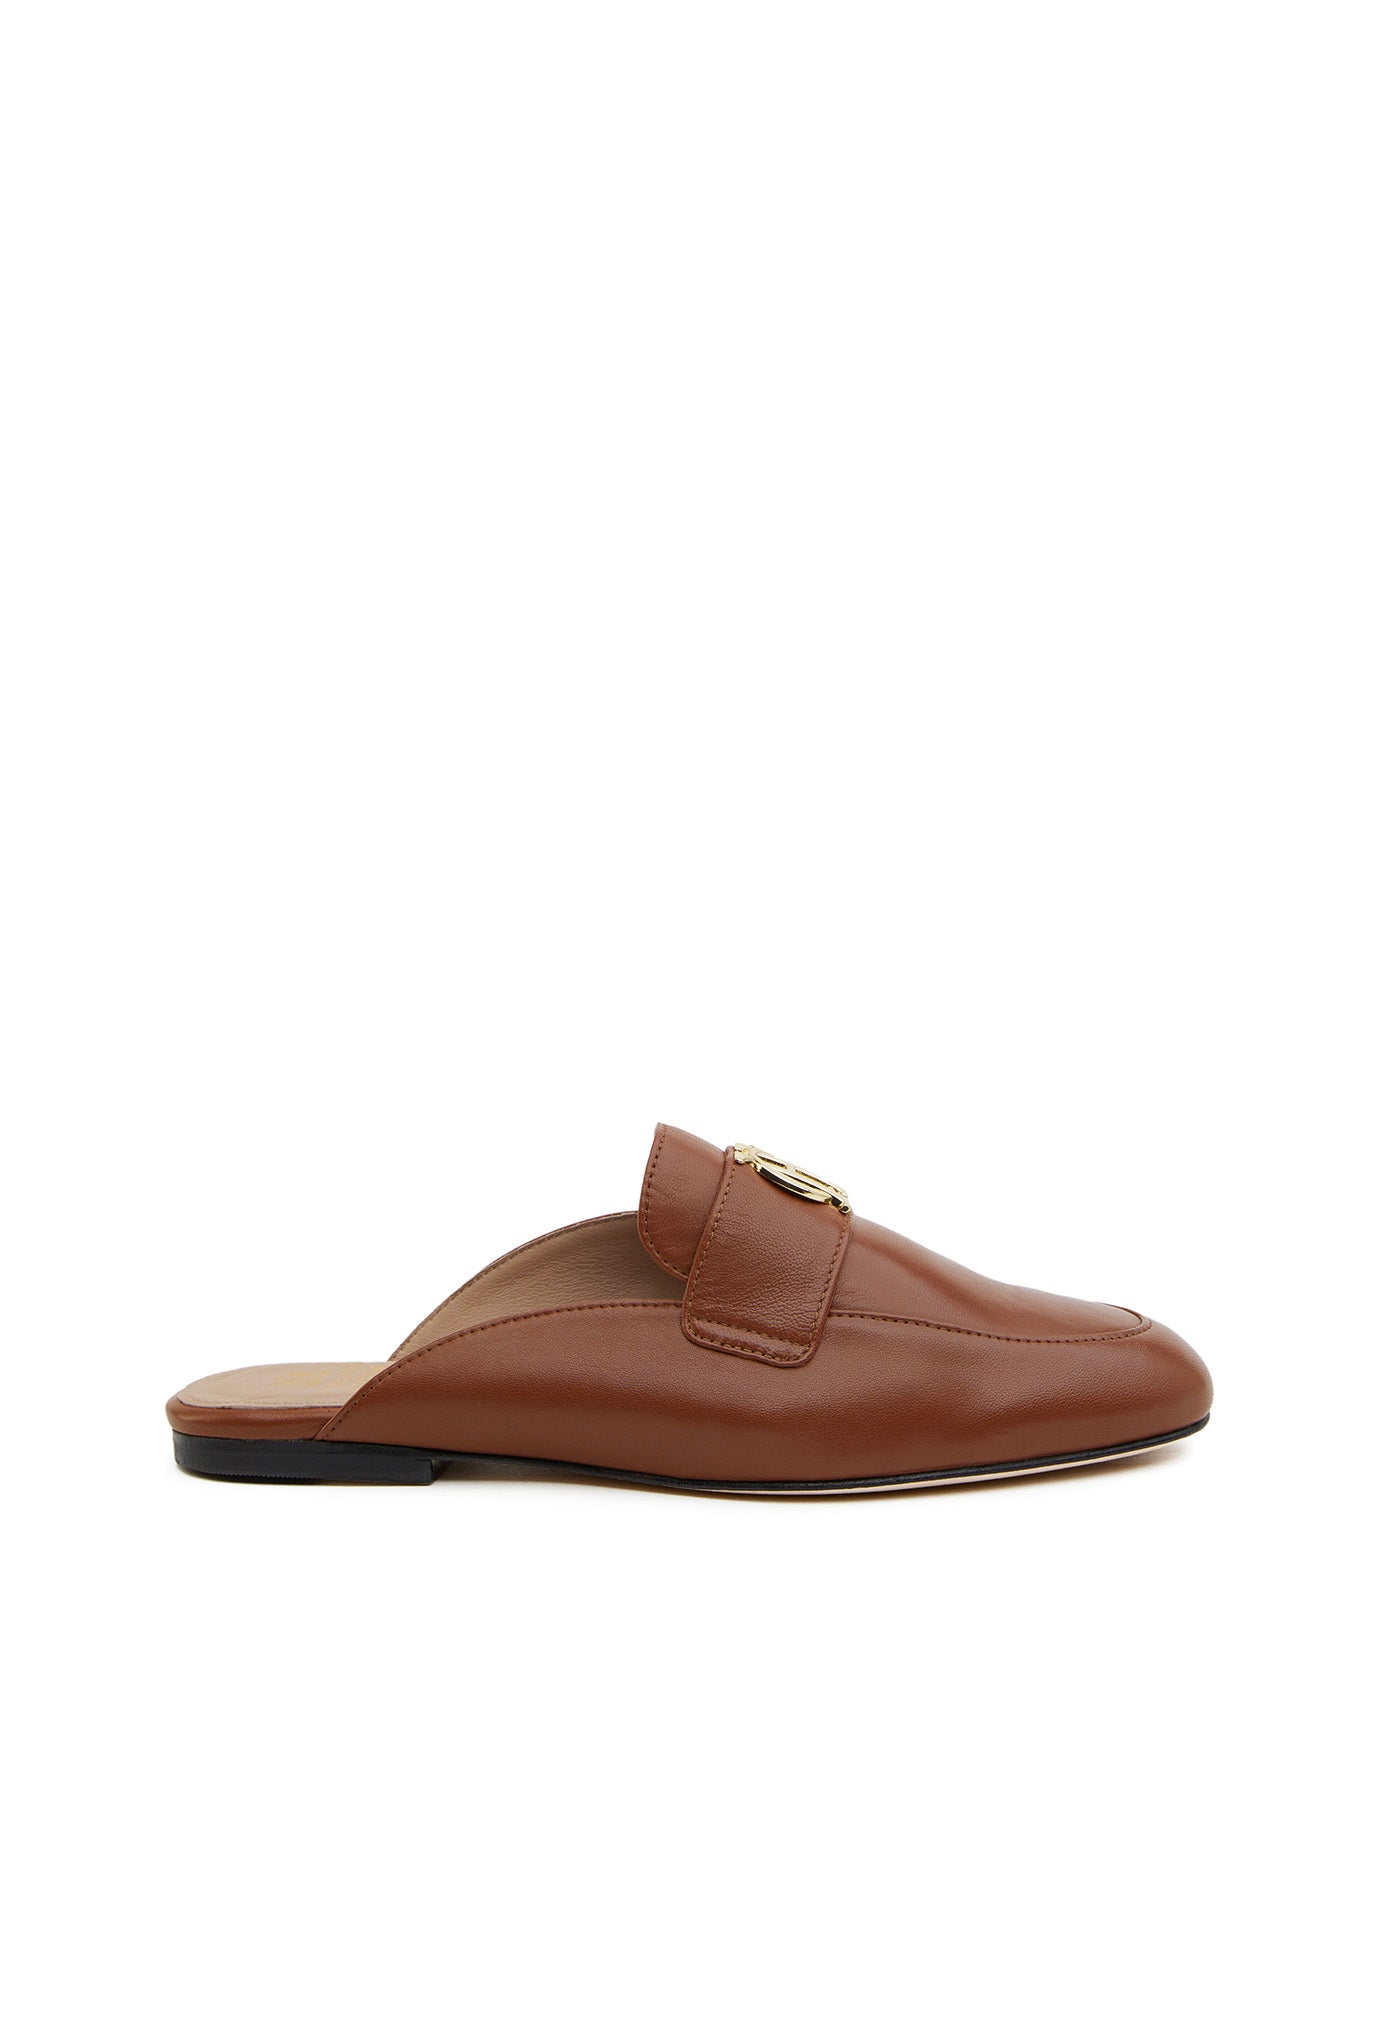 Kingston Loafer - Tan Leather sold by Angel Divine